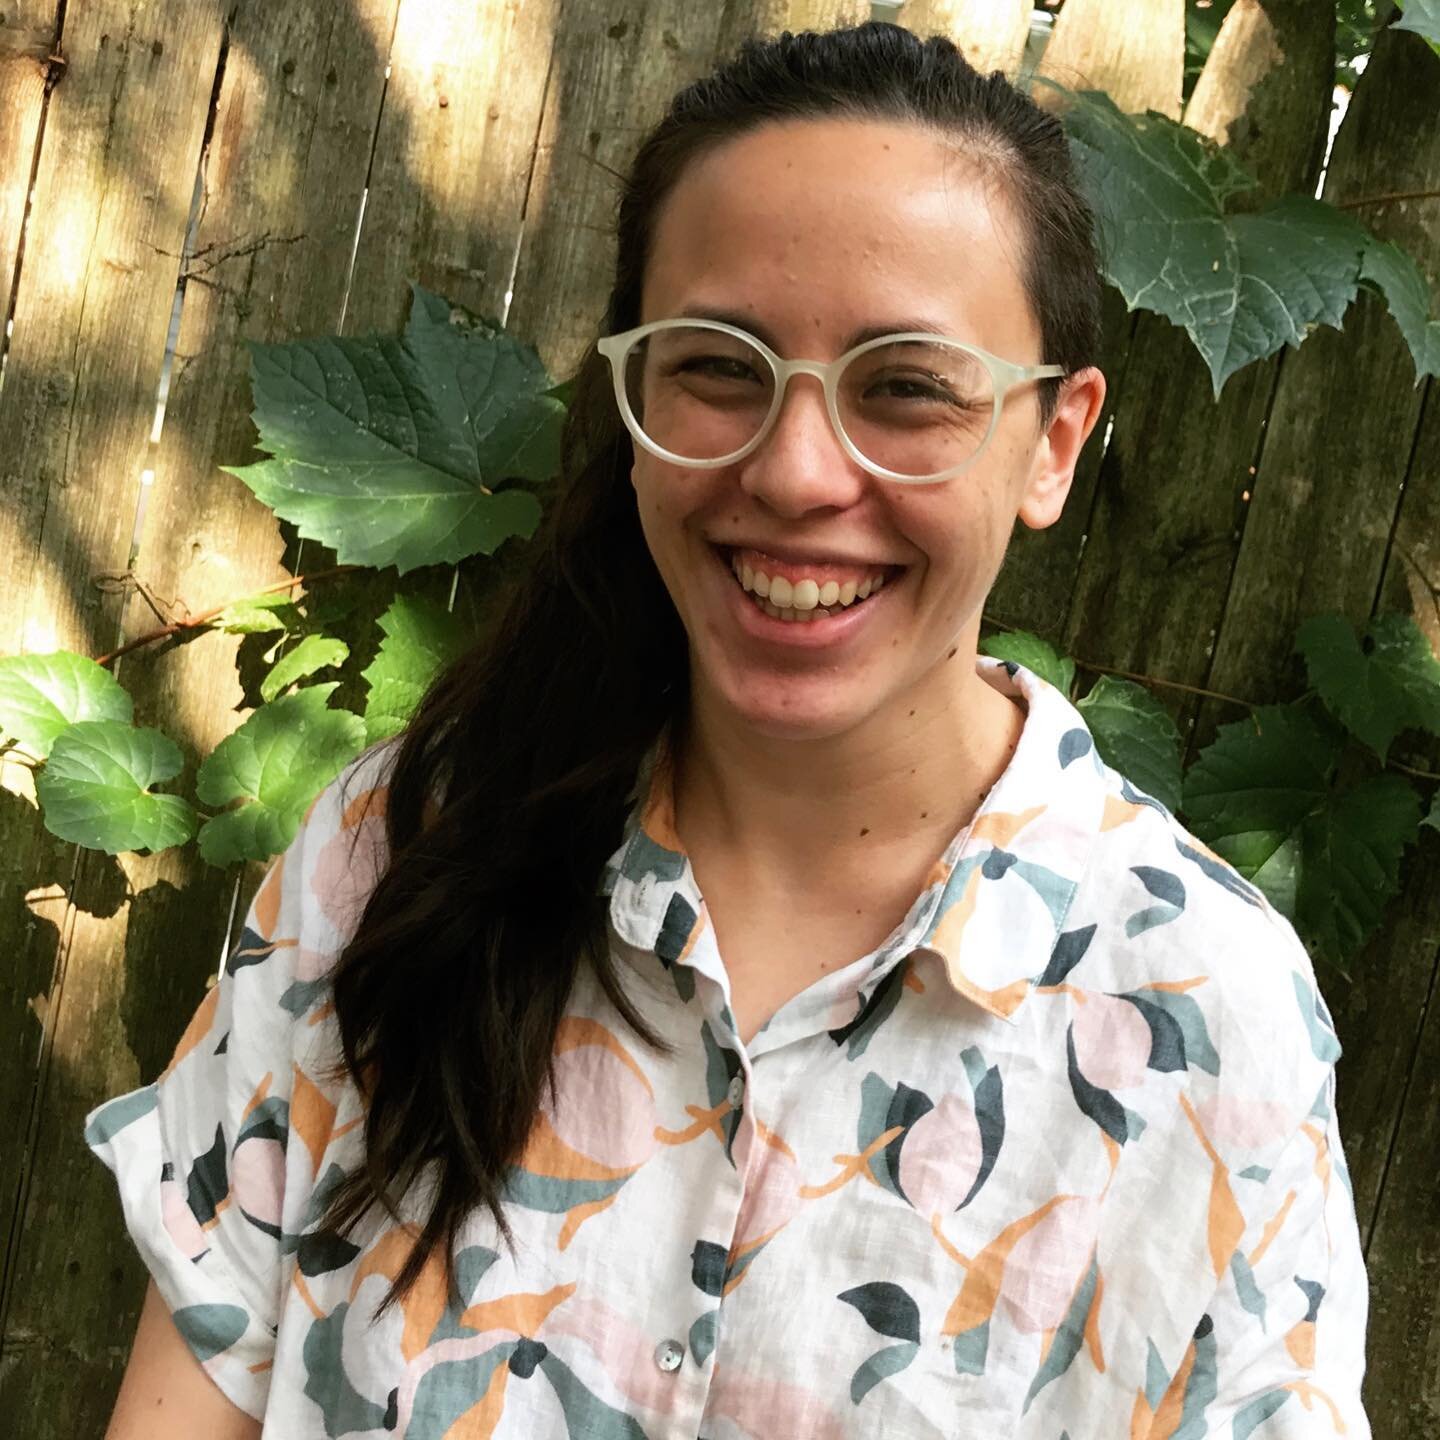 Congratulations to our Director of Special Projects Kait Feldmann on her new role as senior editor at HMH! We can&rsquo;t wait to see the joyful and hilarious books you bring into the world💕💕

#peopleofcolorinpublishing